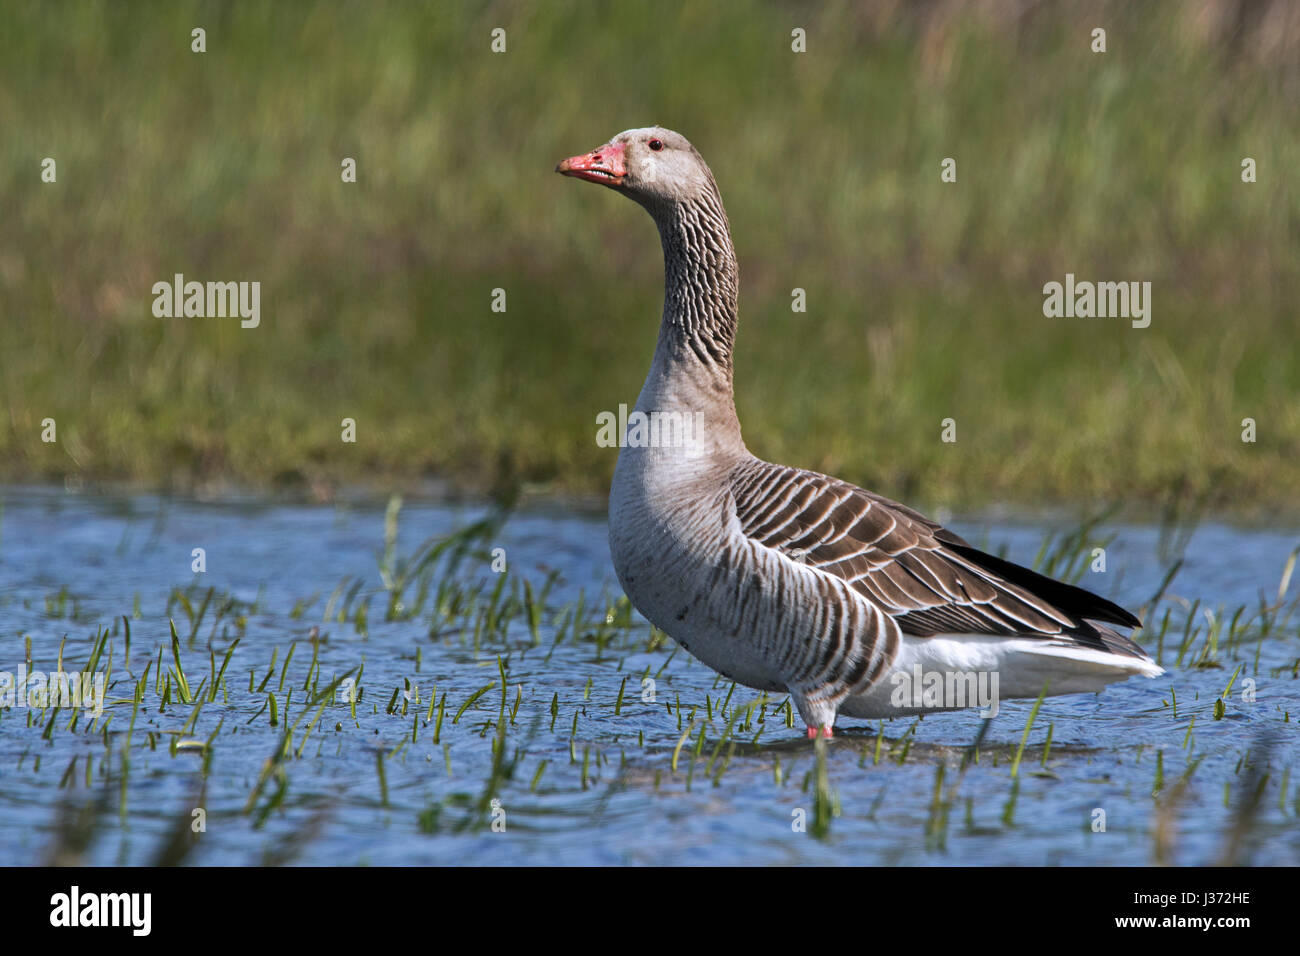 Greylag goose / graylag goose (Anser anser) foraging in shallow water of pond Stock Photo